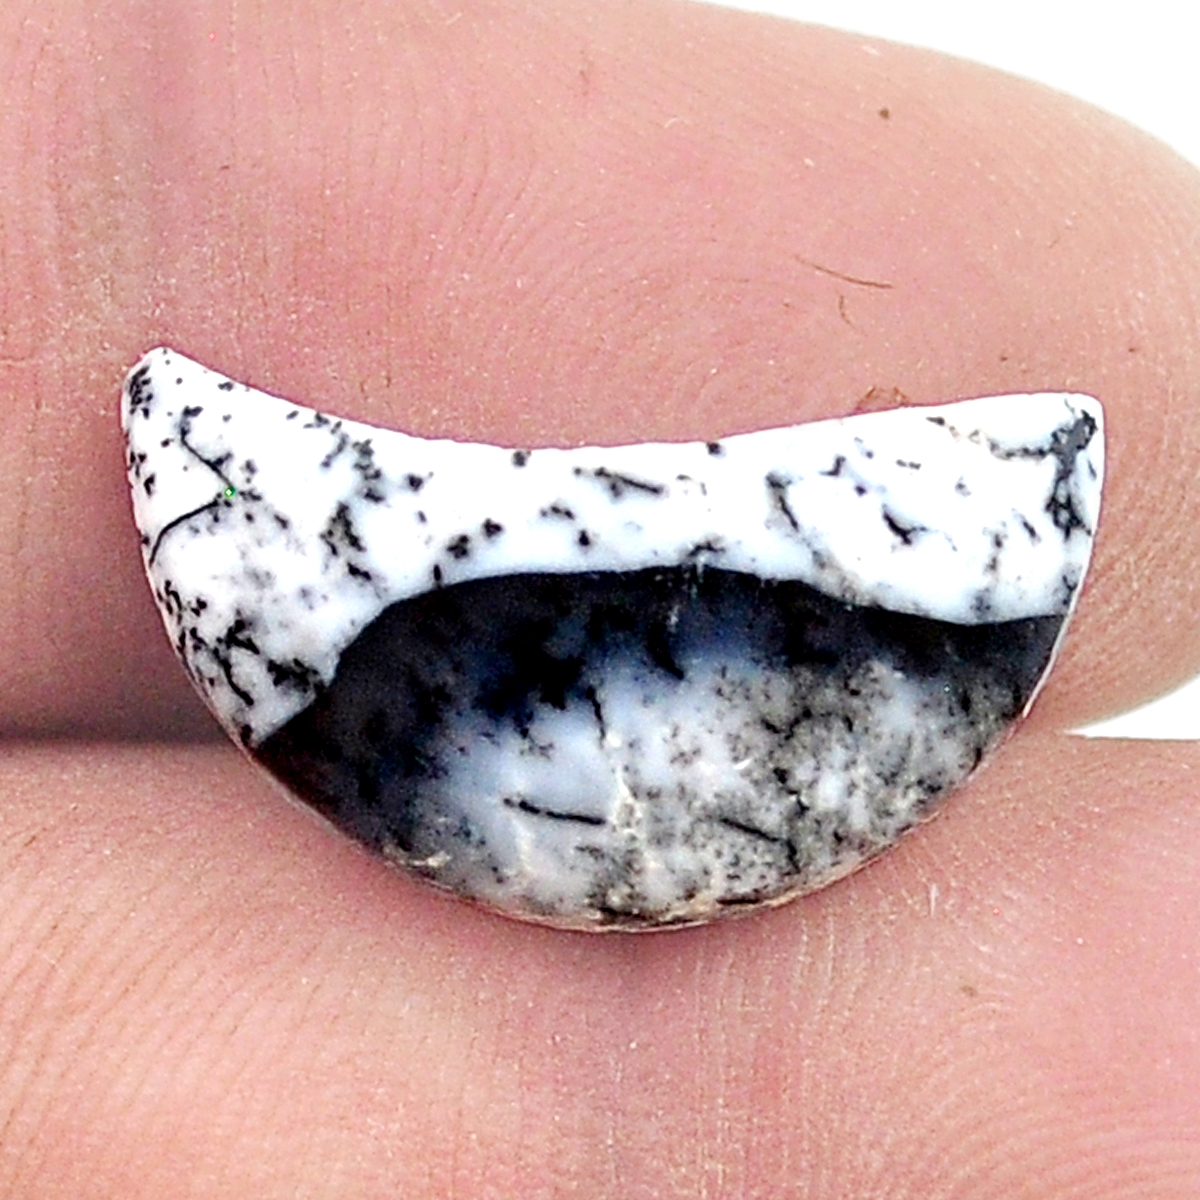 50% Sale Dendlritic Opal Natural New Maxico Healing Cabochon Wholesale Lot Manufacturer Loose Gemstone For Making Jewelry